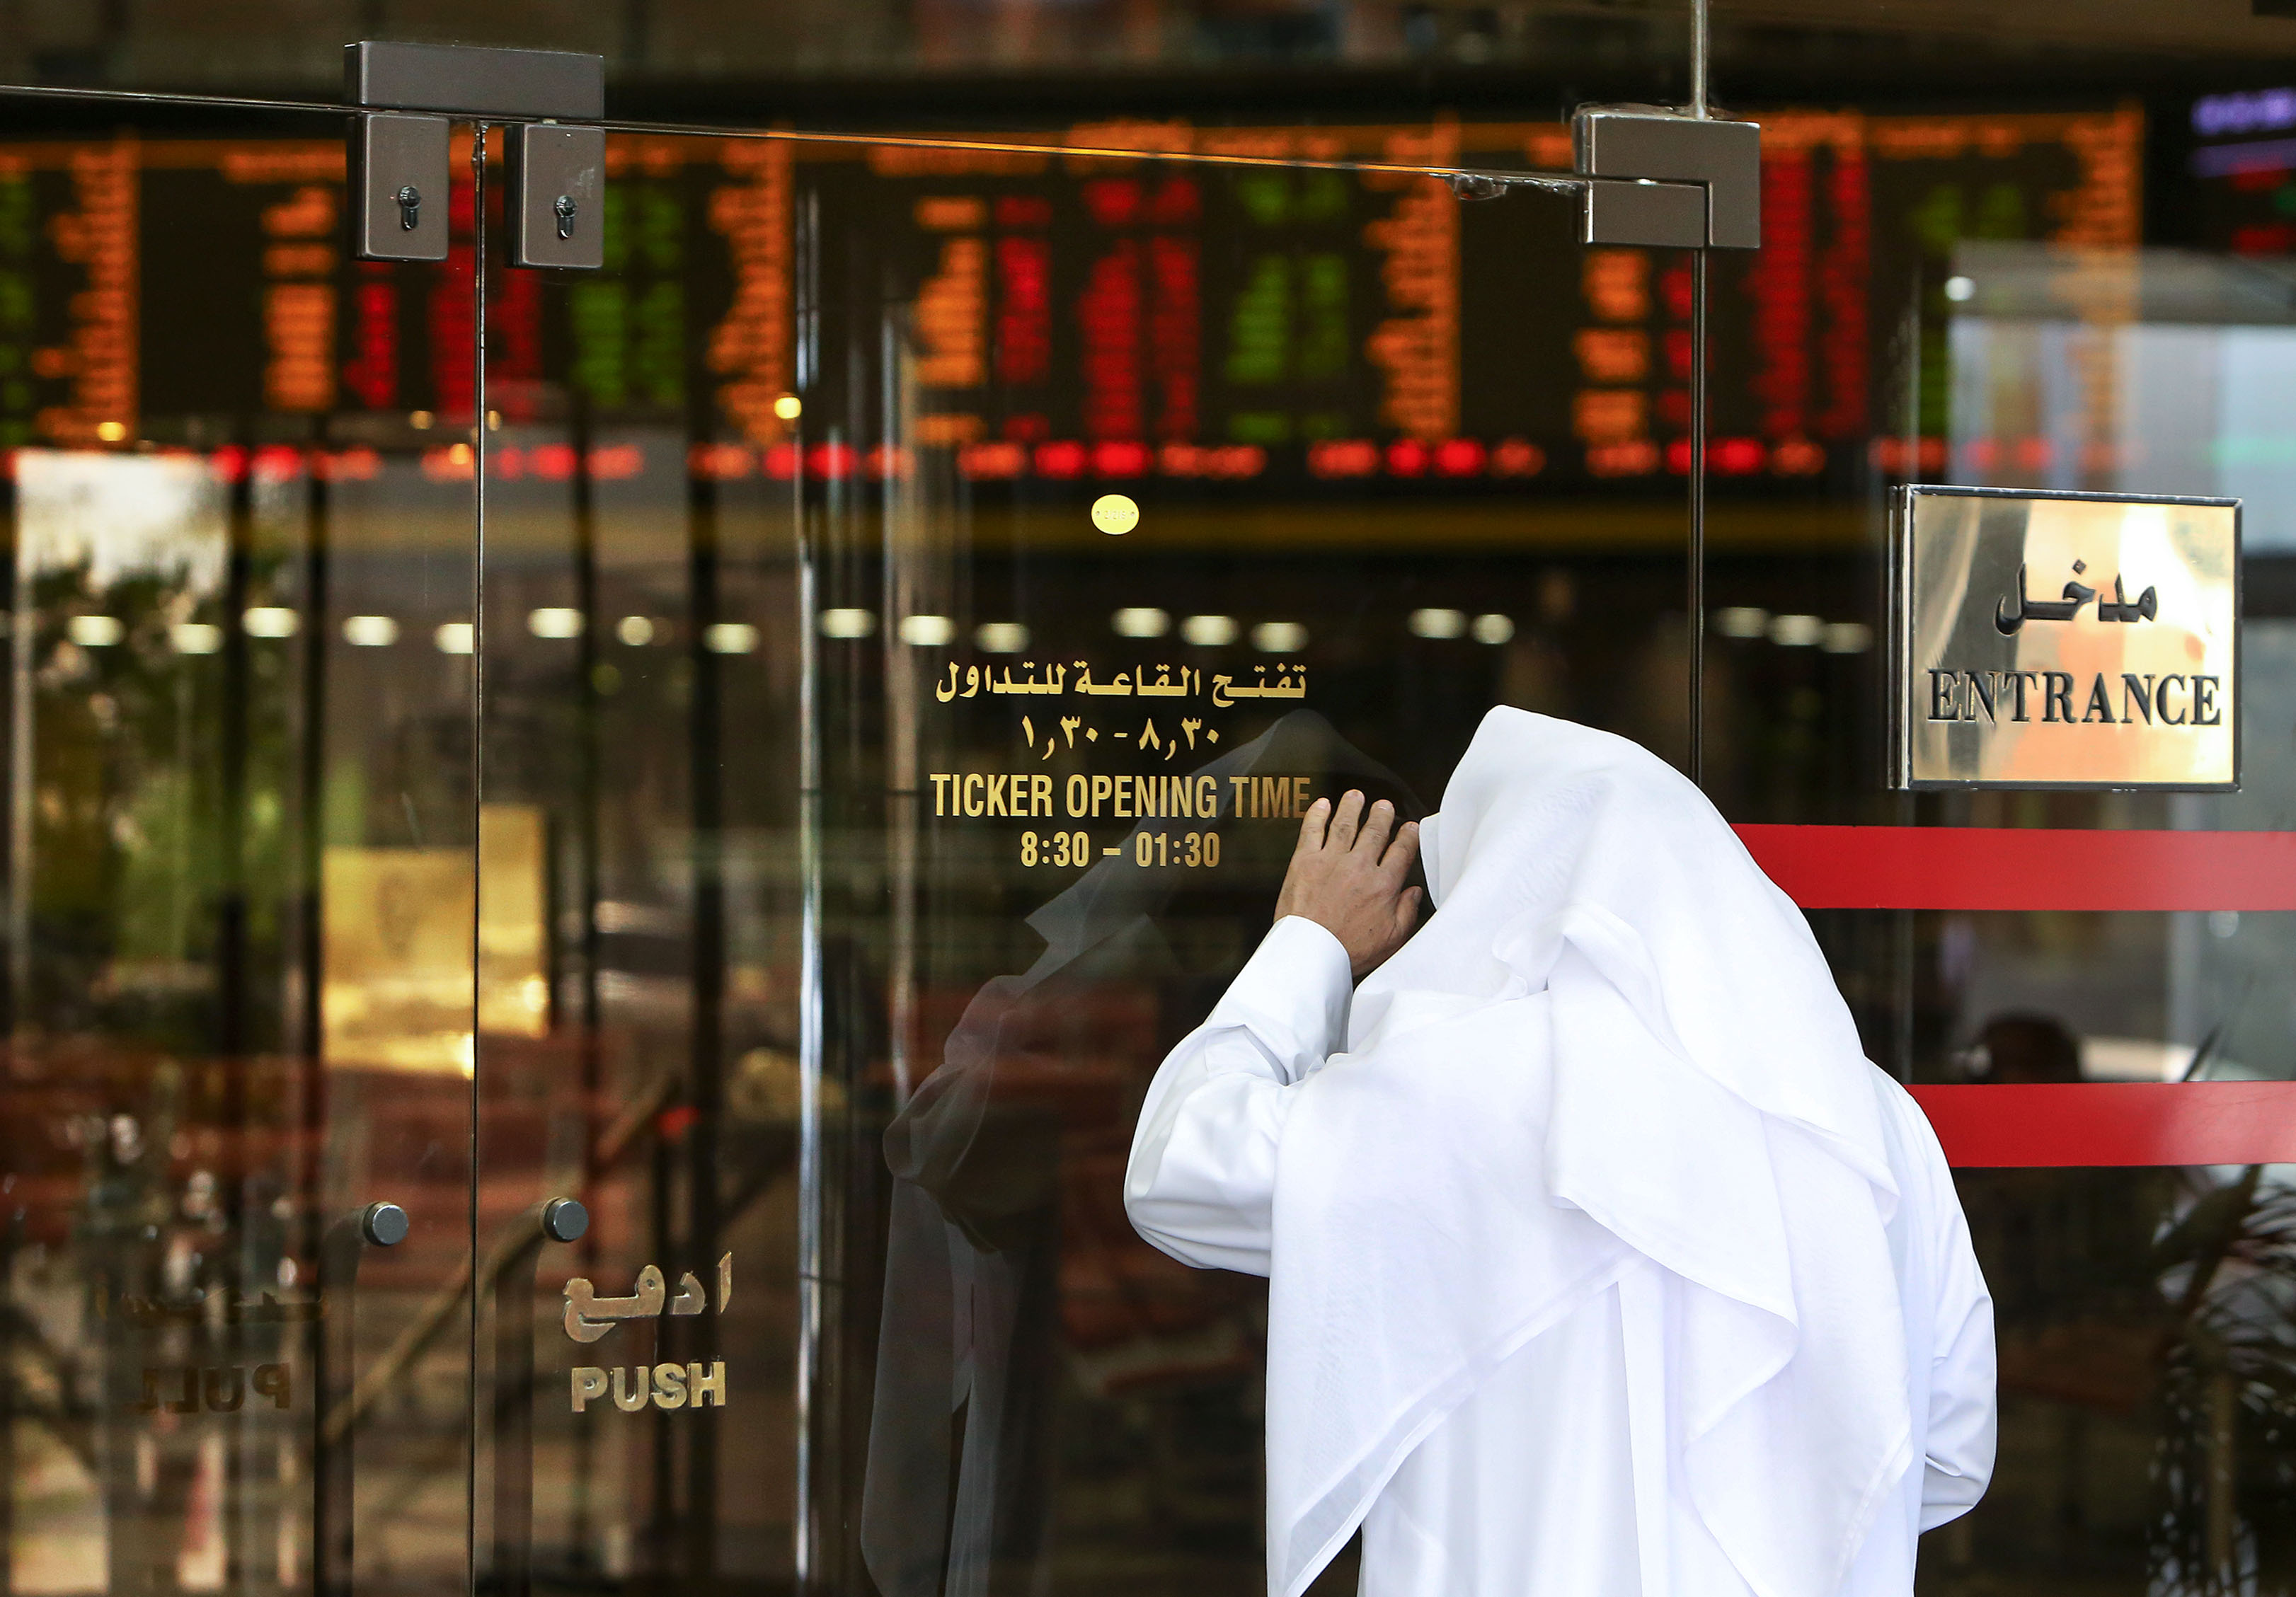 A Kuwaiti trader checks stock prices from the outside after authorities stopped trading at Boursa Kuwait in Kuwait City, on March 8, 2020. - Kuwait Boursa authorities stopped trading after the Premier Index slumped 10 percent while the All-Shares index dived 8.4 percent, as shares in the energy-dependent Gulf plunged to multi-year lows after OPEC's failure to agree on a coronavirus action plan prompted fears of an all-out oil price war. (Photo by YASSER AL-ZAYYAT / AFP)